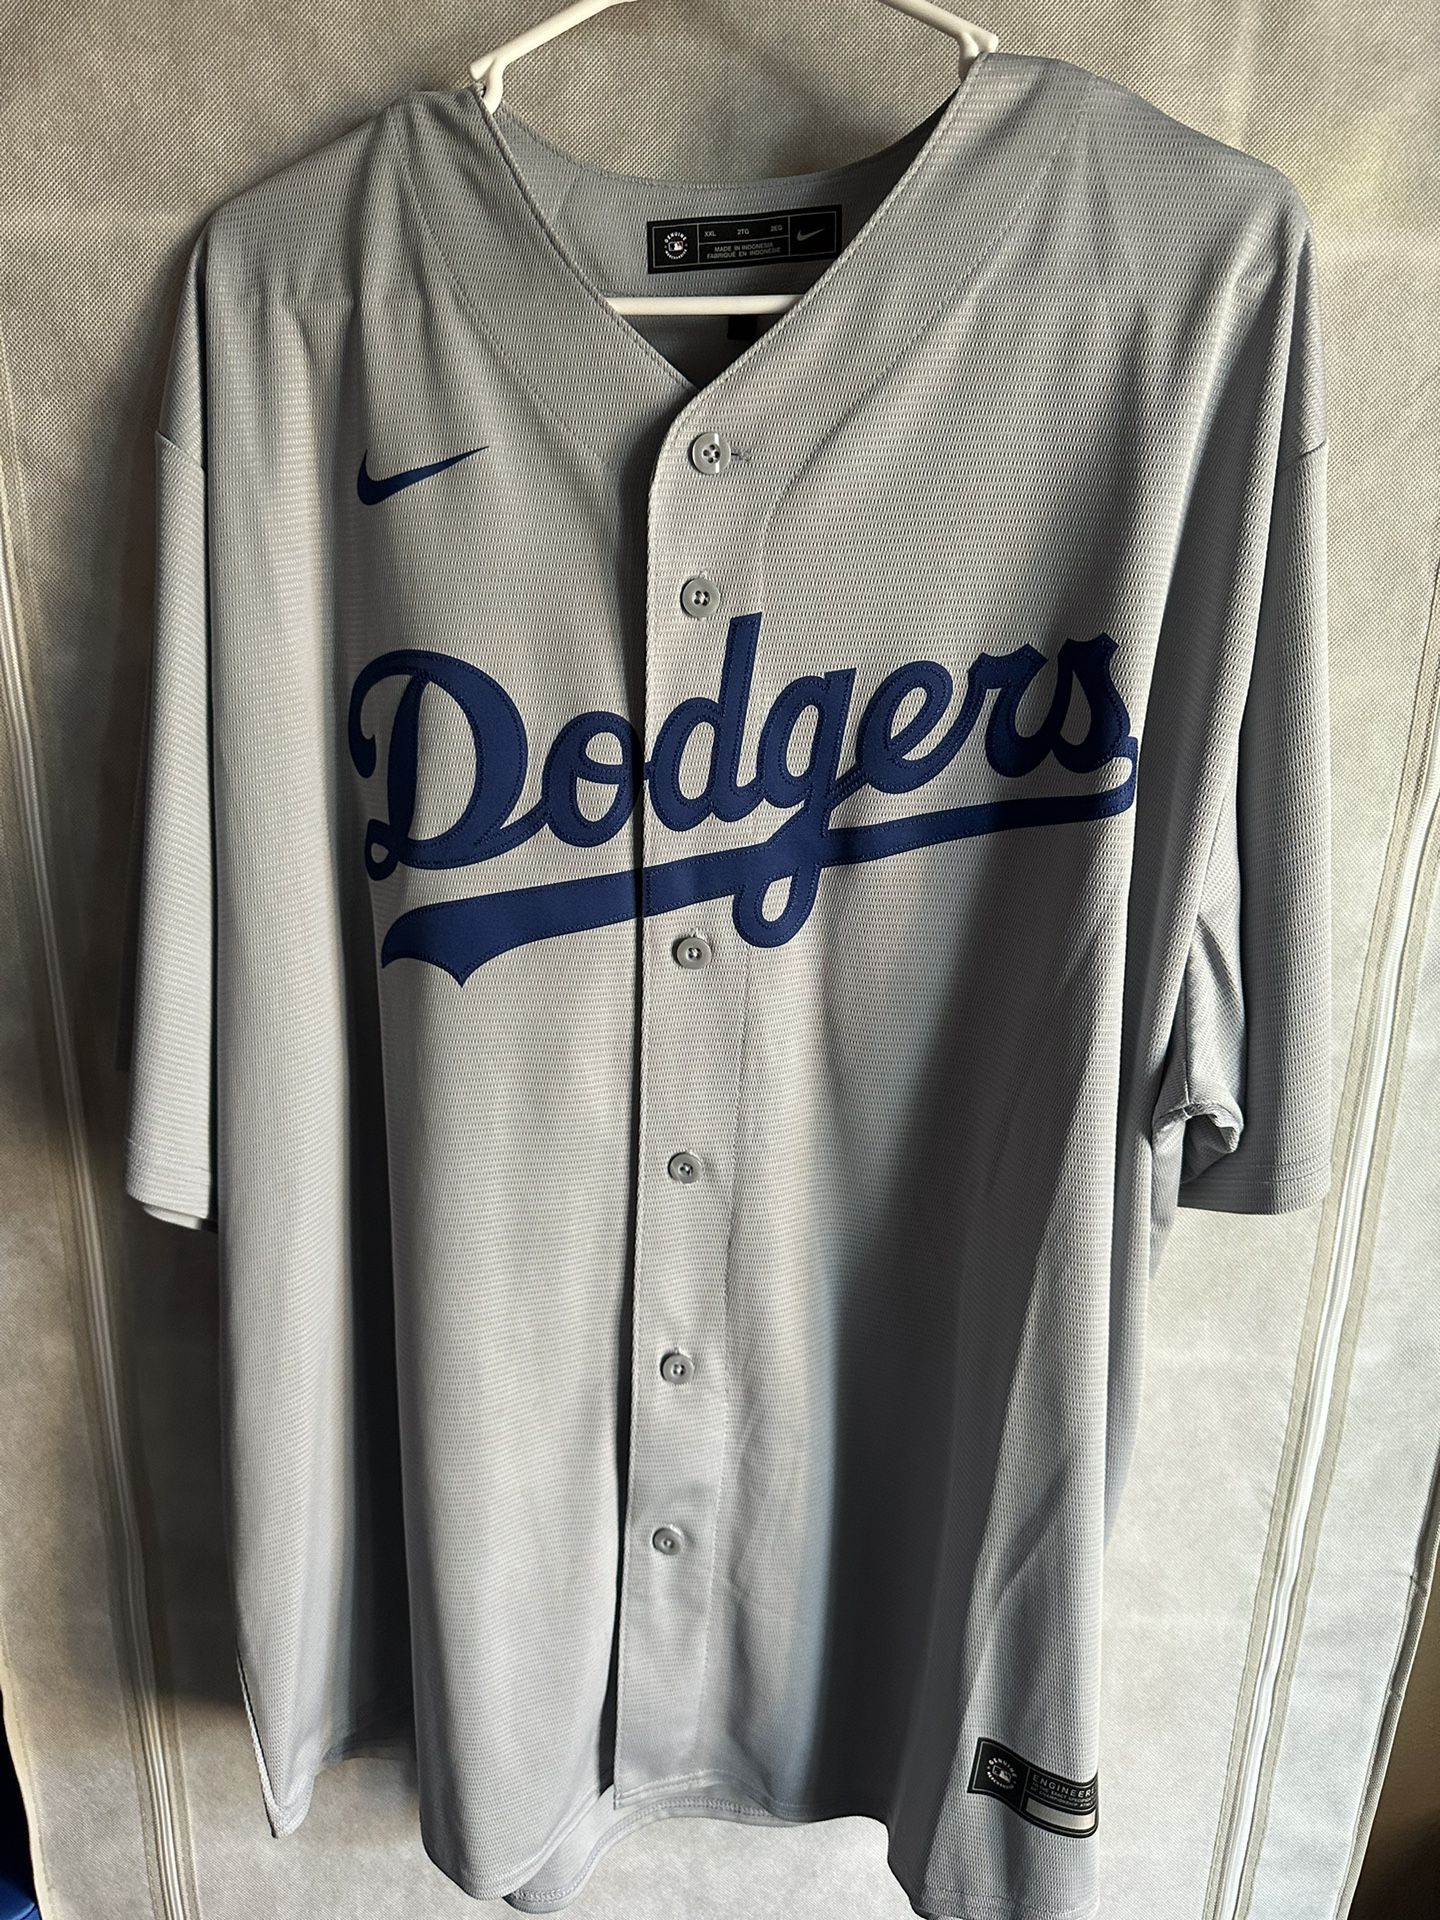 Nike Los Angeles Dodgers Jersey Grey Mens Sz2XL XXL Used Worn 1x for Sale  in Hanford, CA - OfferUp